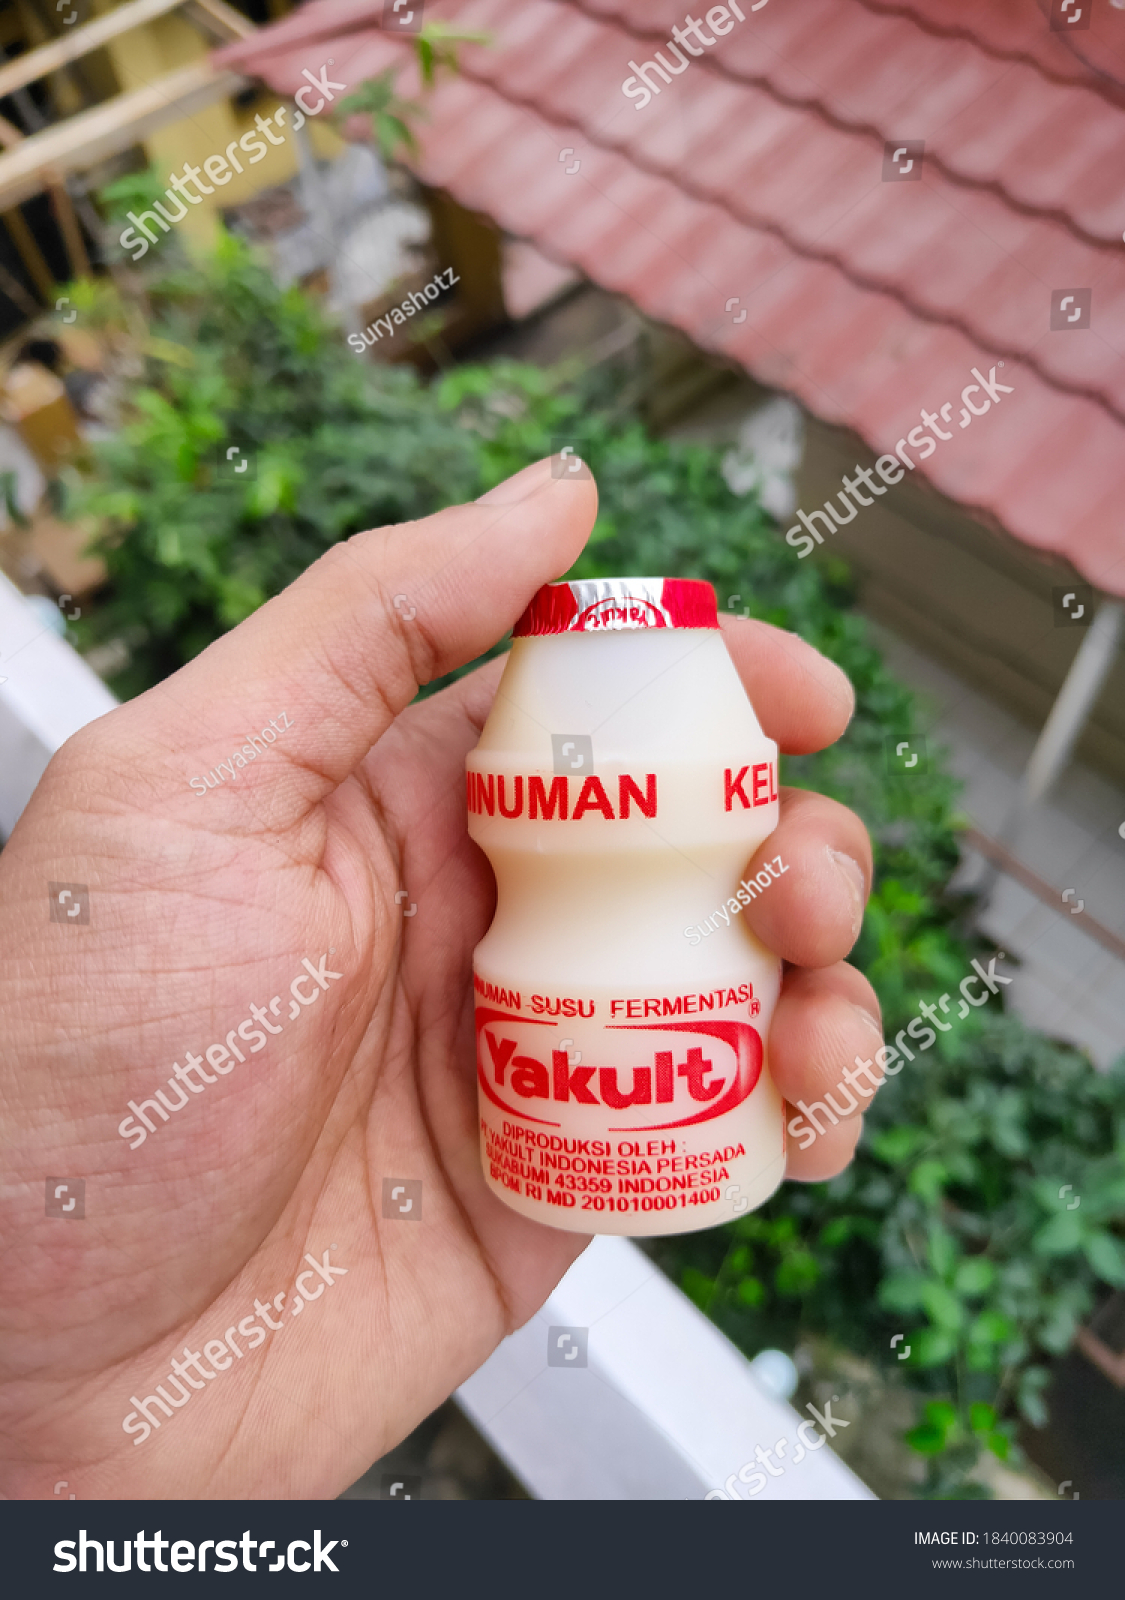 What is yakult made of